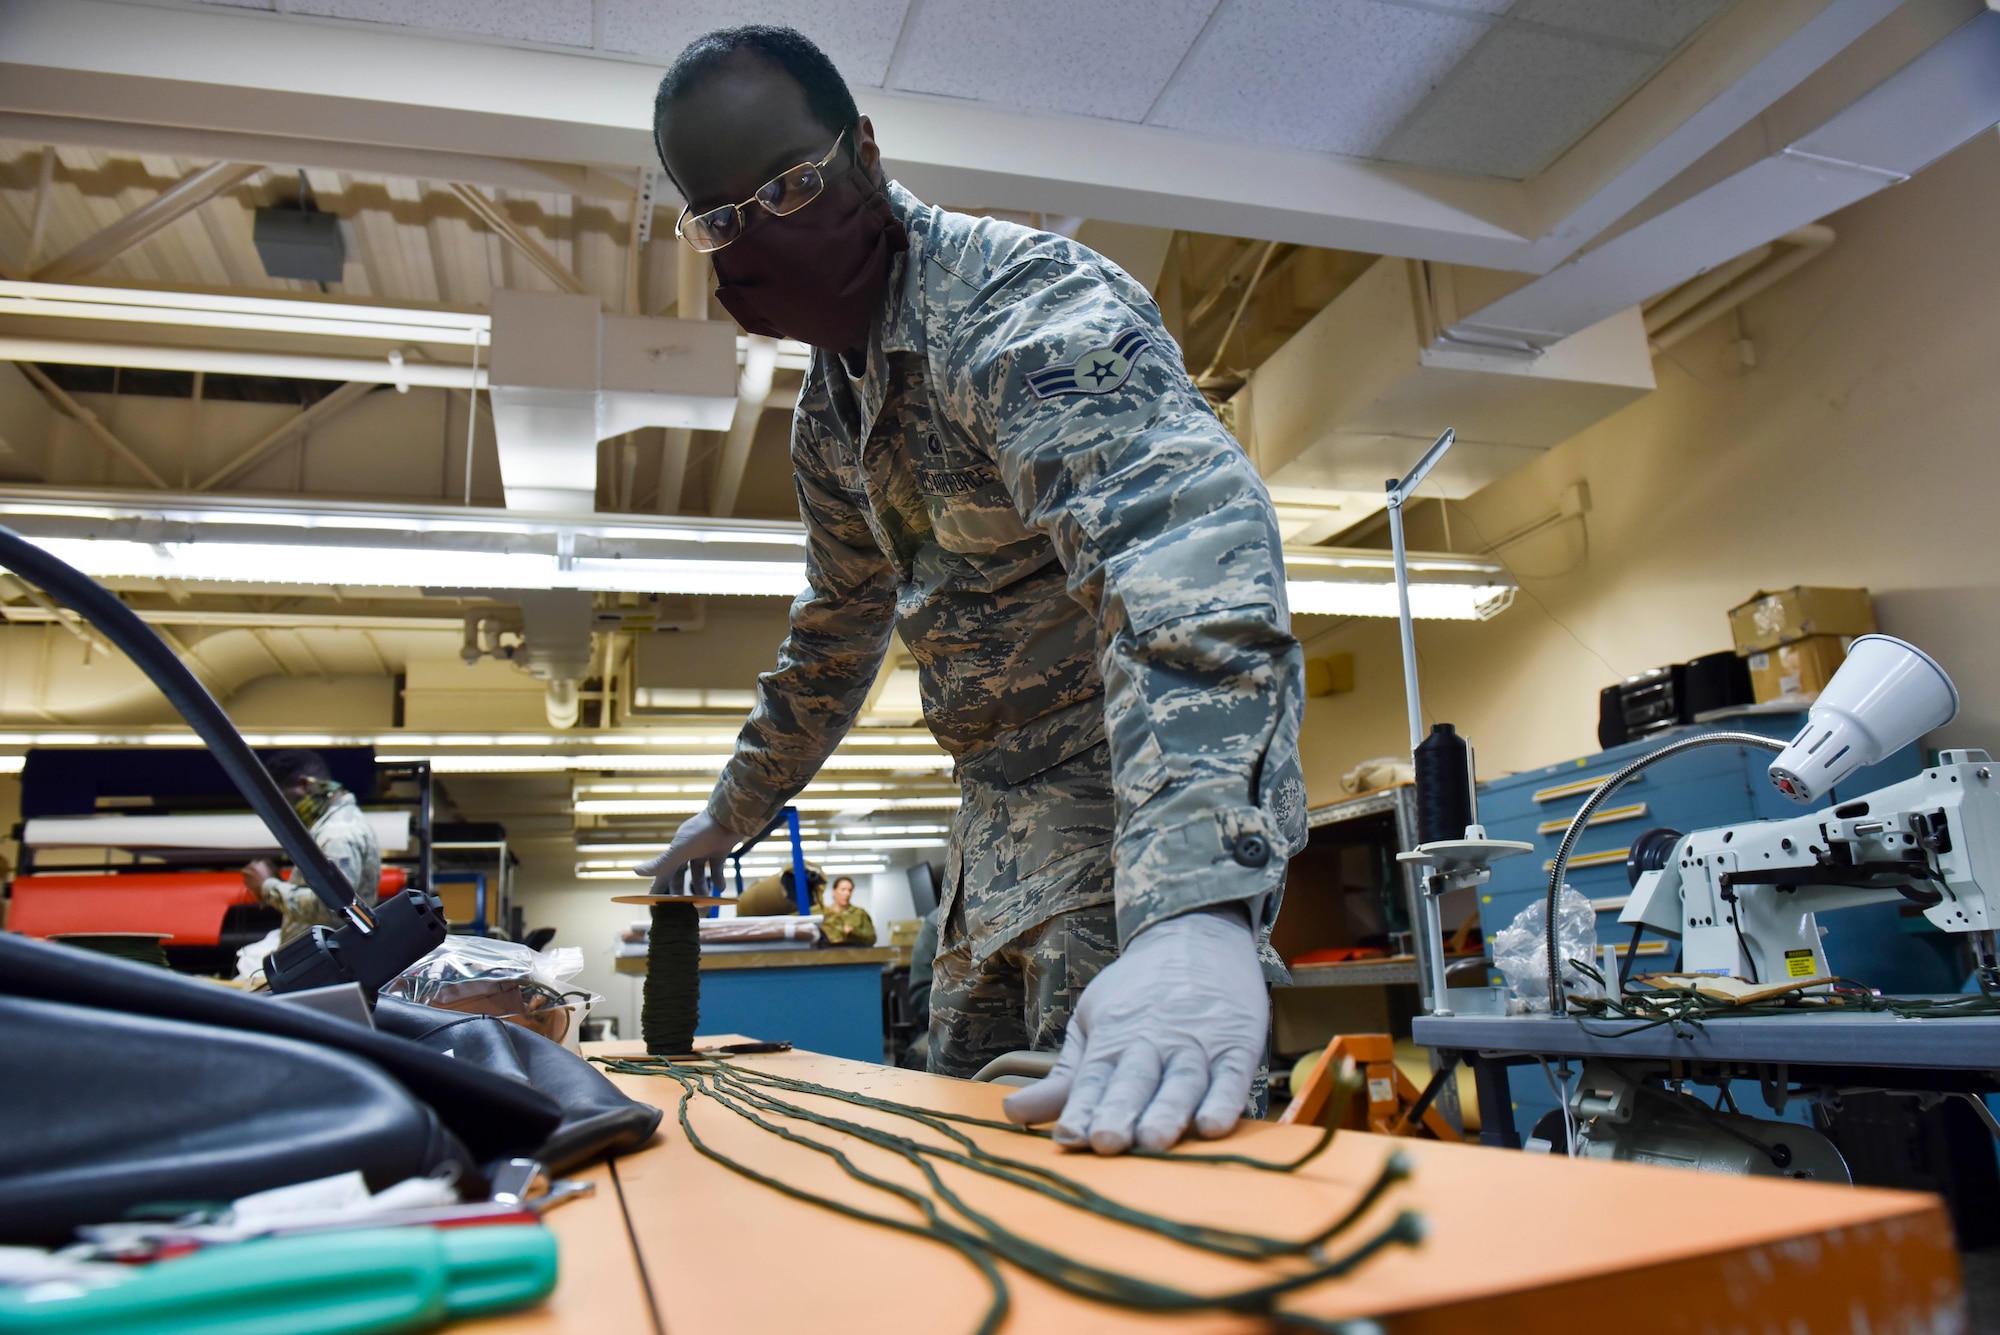 U.S. Air Force Airman 1st Class Ryan Richardson, 92nd Operation Support Squadron Aircrew Flight Equipment apprentice, measures paracord at Fairchild Air Force Base, Washington, April 10, 2020.  The paracord was cut and sewn into protective facemasks for Airmen to wear at Fairchild, during the COVID-19 pandemic. Force Health Protection remains one of Fairchild’s top priorities; with support of AFE and its Airmen, Fairchild is able to take proactive steps toward preventing the potential spread of respiratory illnesses, like the flu or COVID-19, amongst its Airmen, families and community. (U.S. Air Force photo by Senior Airman Lawrence Sena)